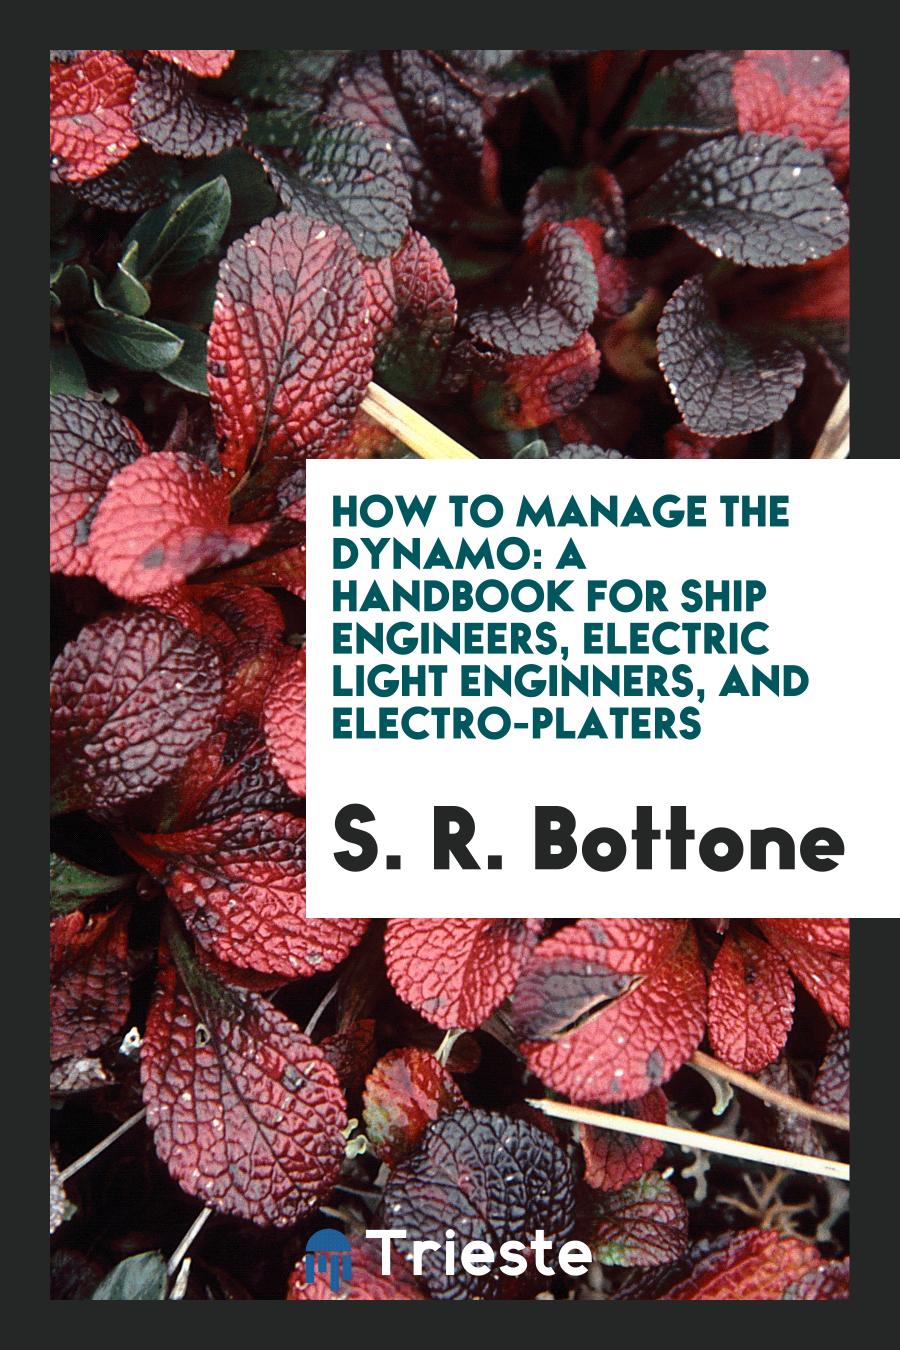 How to Manage the Dynamo: A Handbook for Ship Engineers, Electric Light enginners, and electro-platers